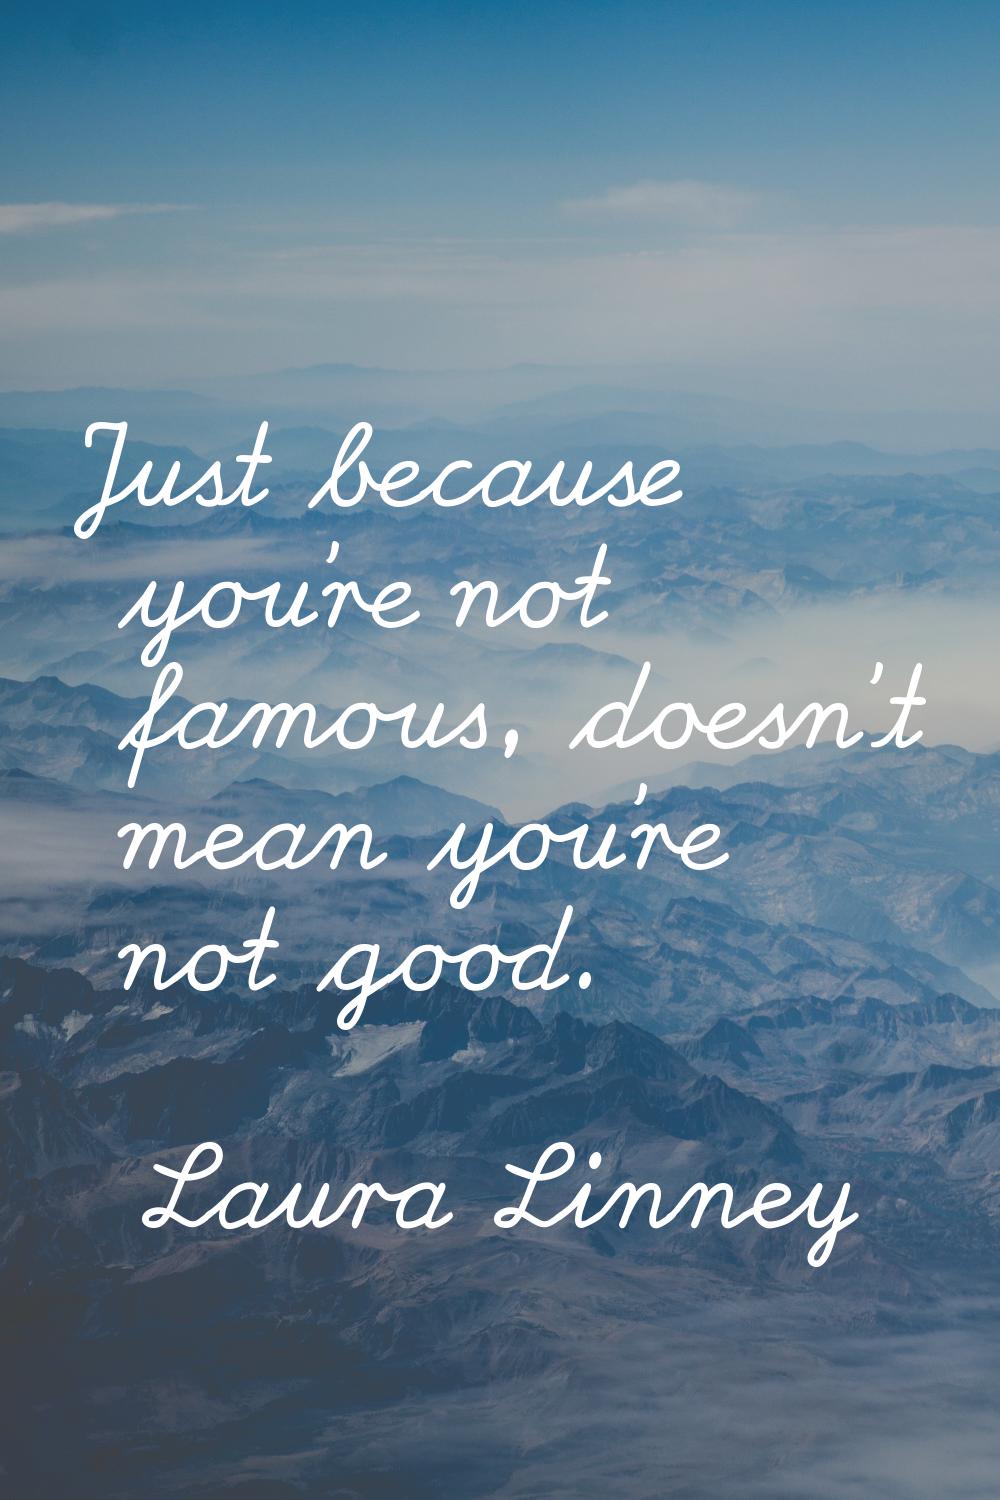 Just because you're not famous, doesn't mean you're not good.